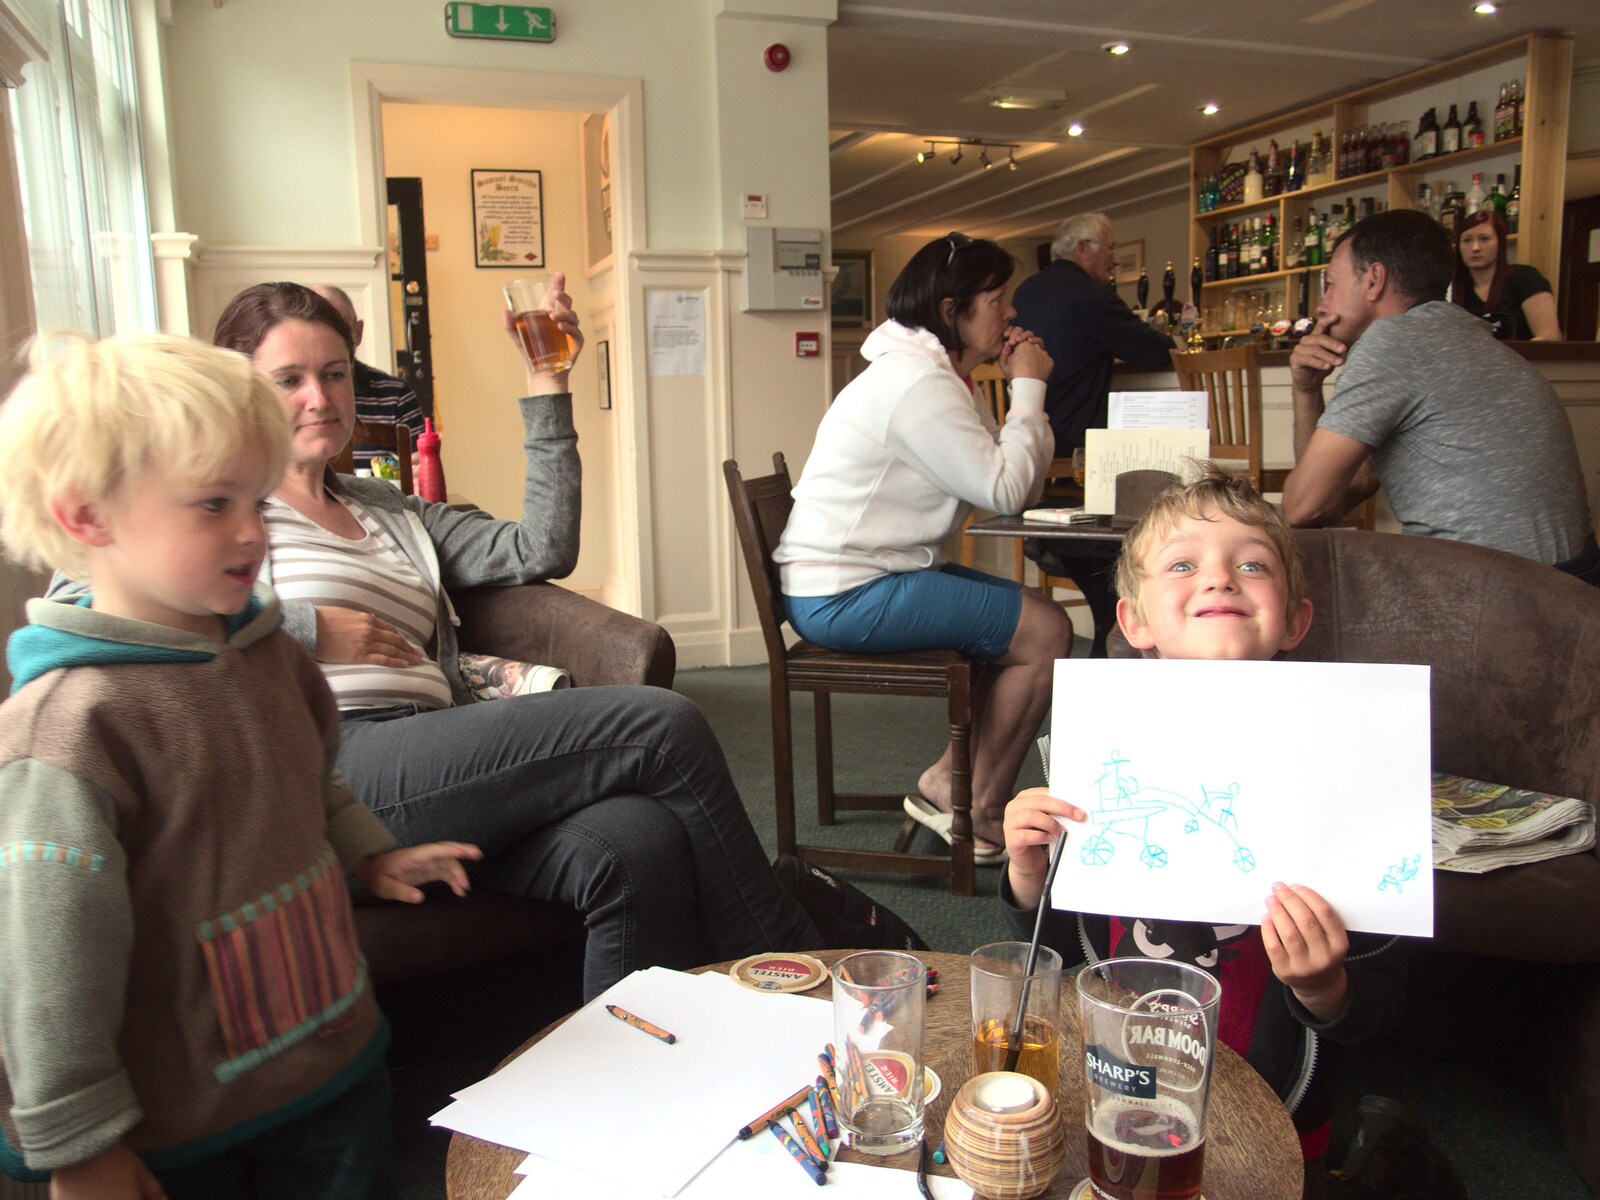 Fred holds up one of his drawings in the pub from A Birthday Camping Trip, East Runton, North Norfolk - 26th May 2015